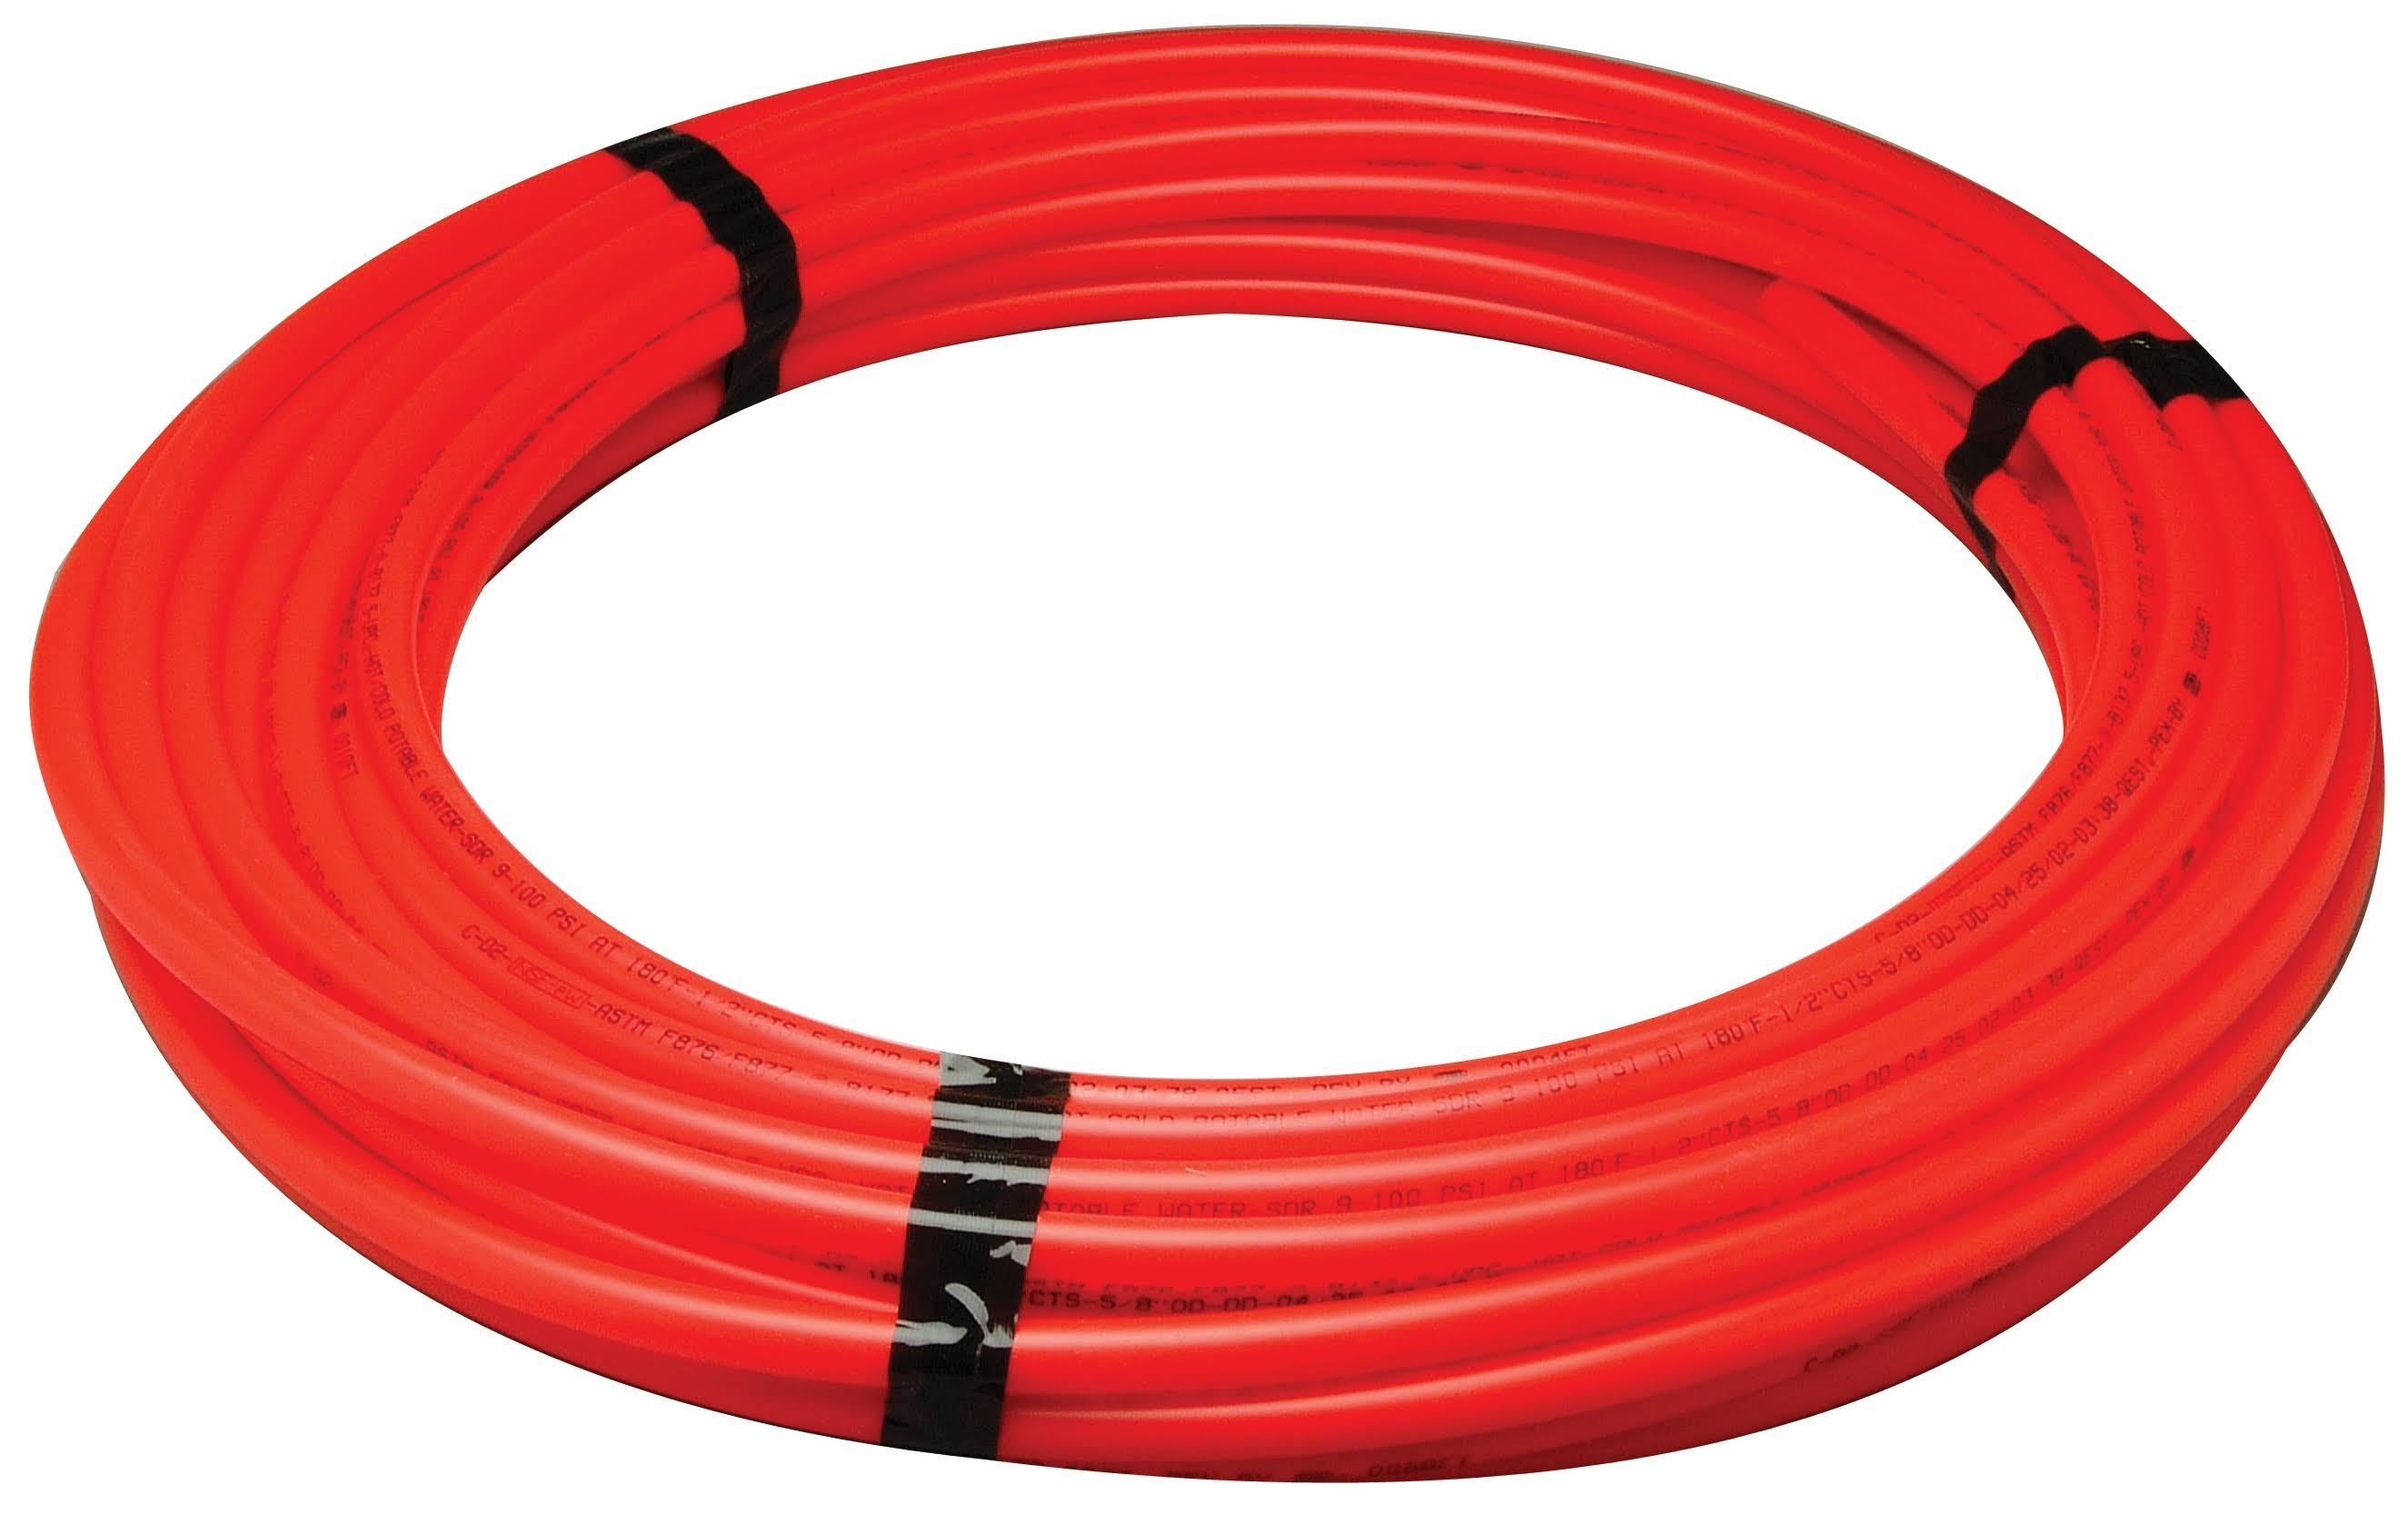 Zurn Q4PC300XRED PEX Hot Cold Potable Non-Barrier Tubing Coil - 3/4" Dia, 300' Length, 0.75" OD, Plastic, Red